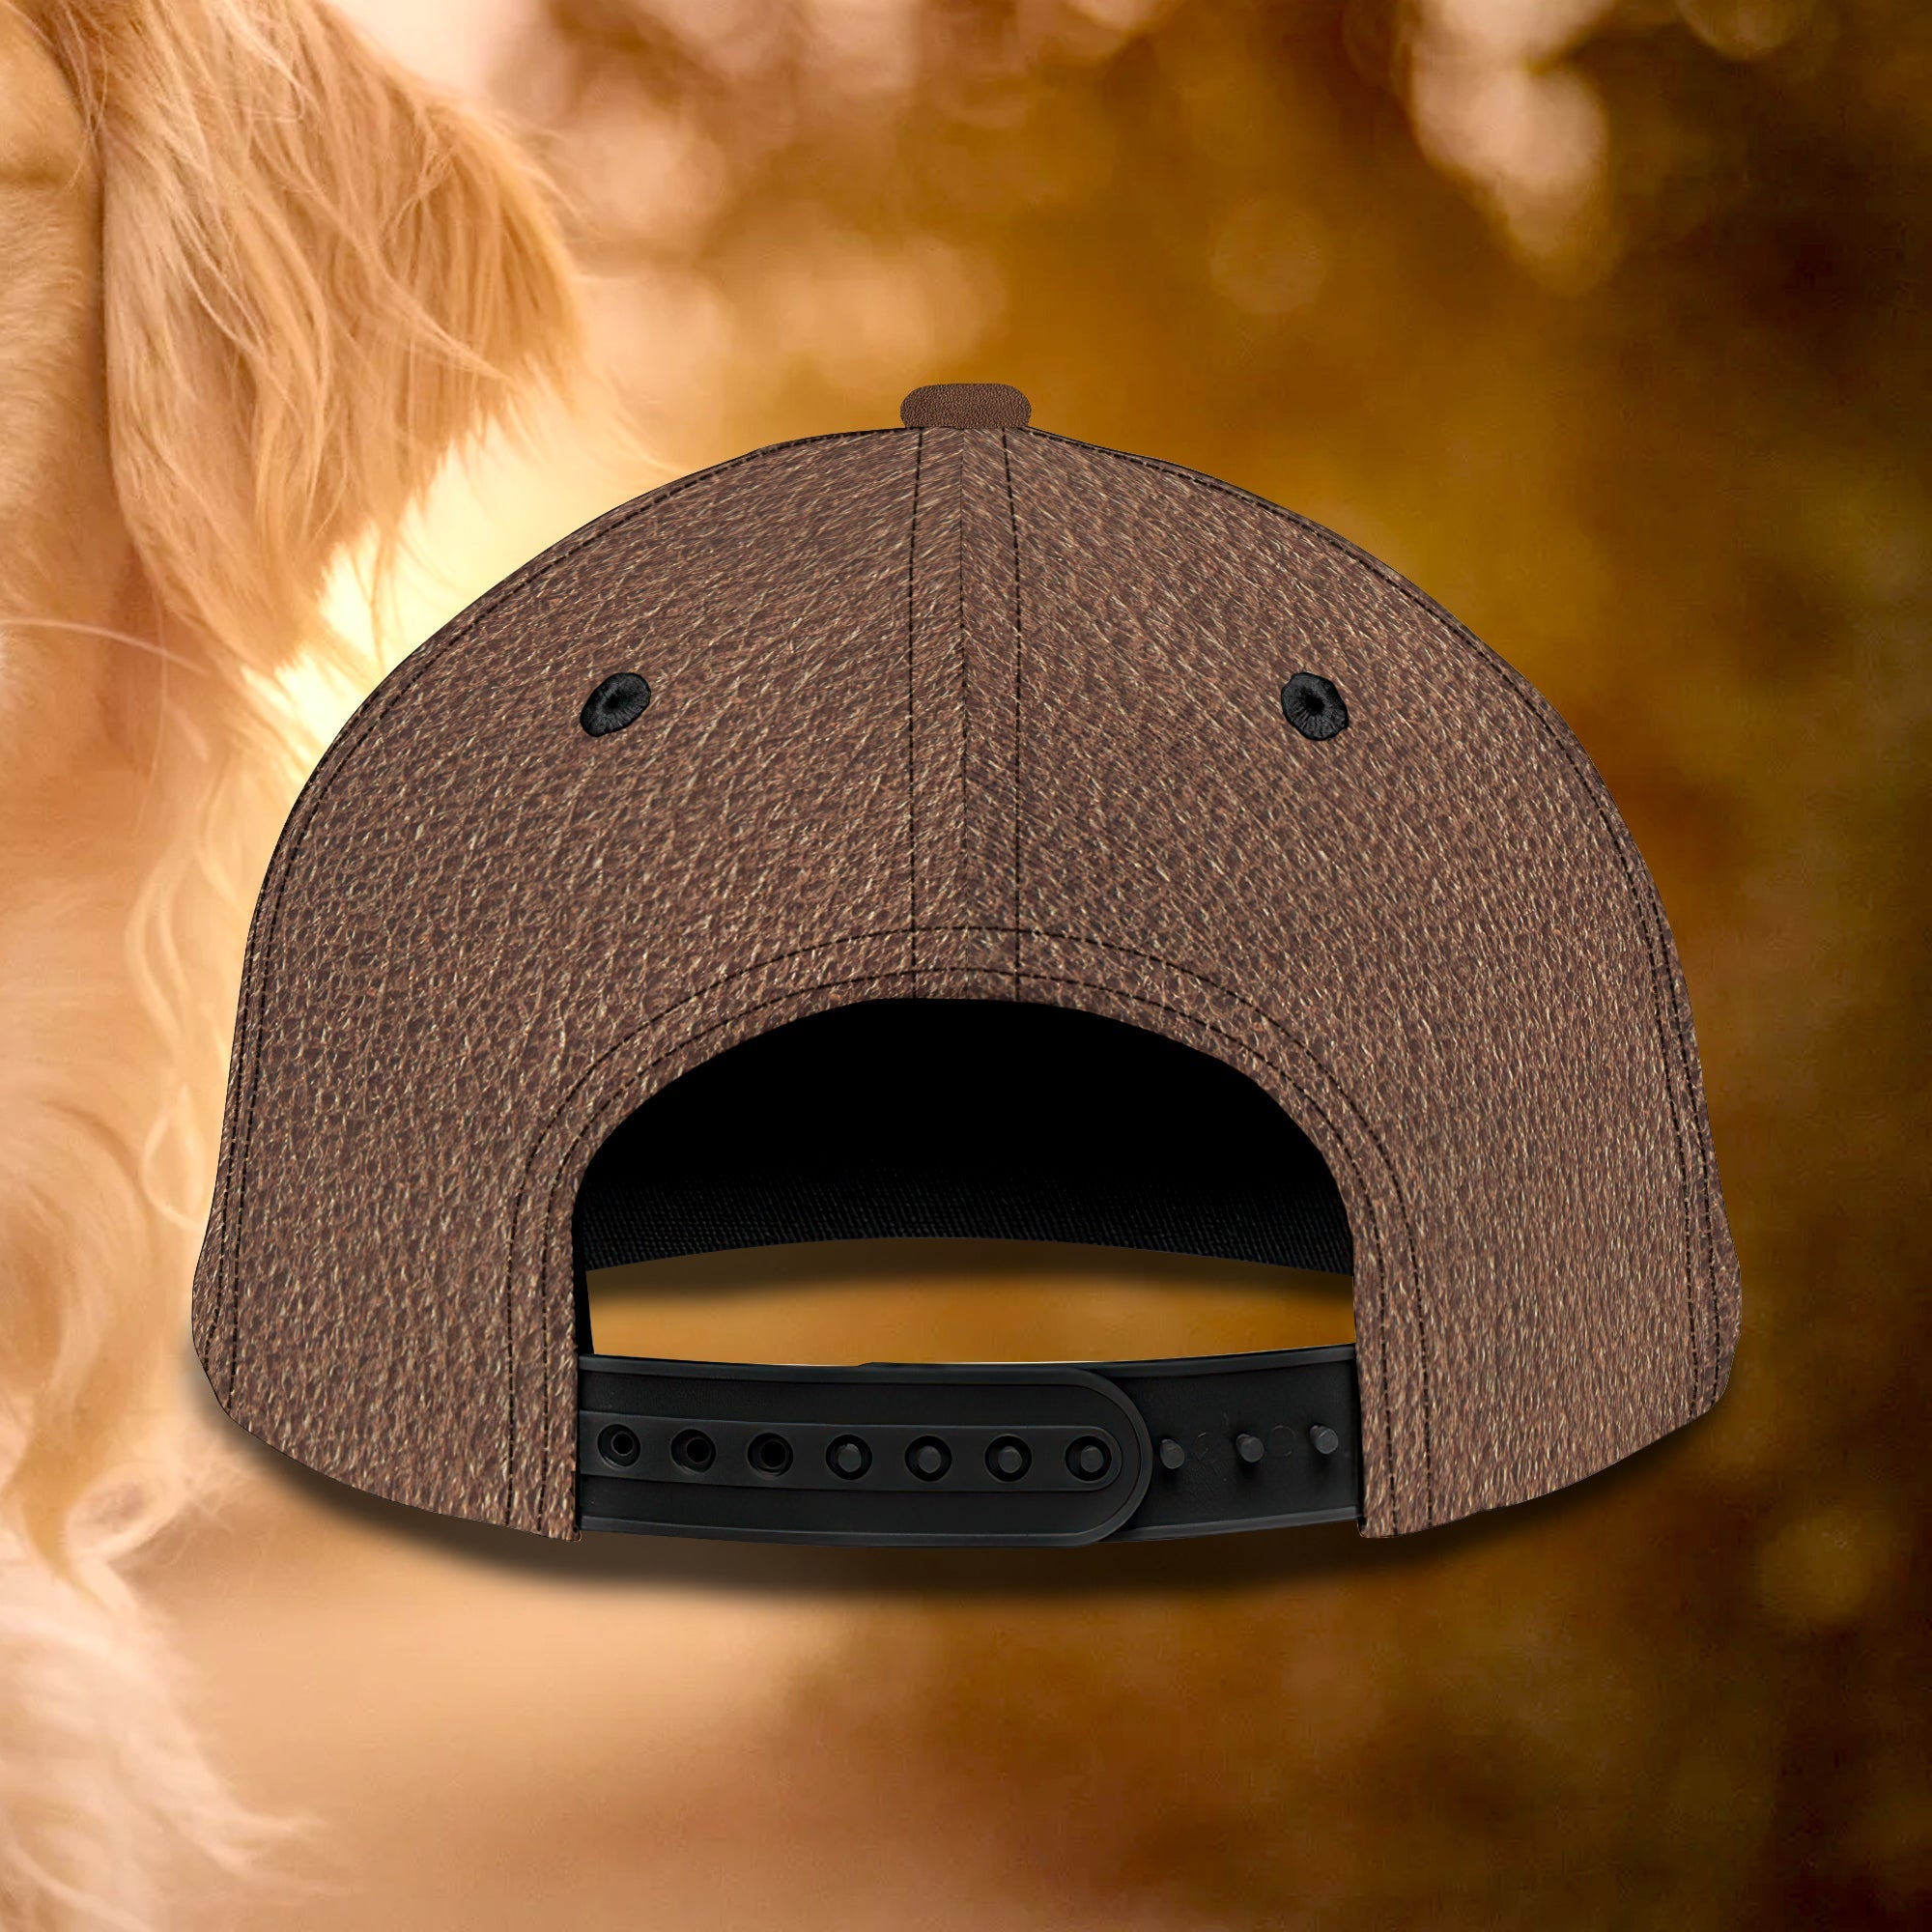 Personalized 3D Full Printed Dog Cap/ Baseball Dog Hat For Men And Women/ Cap Hat For Dog Lovers